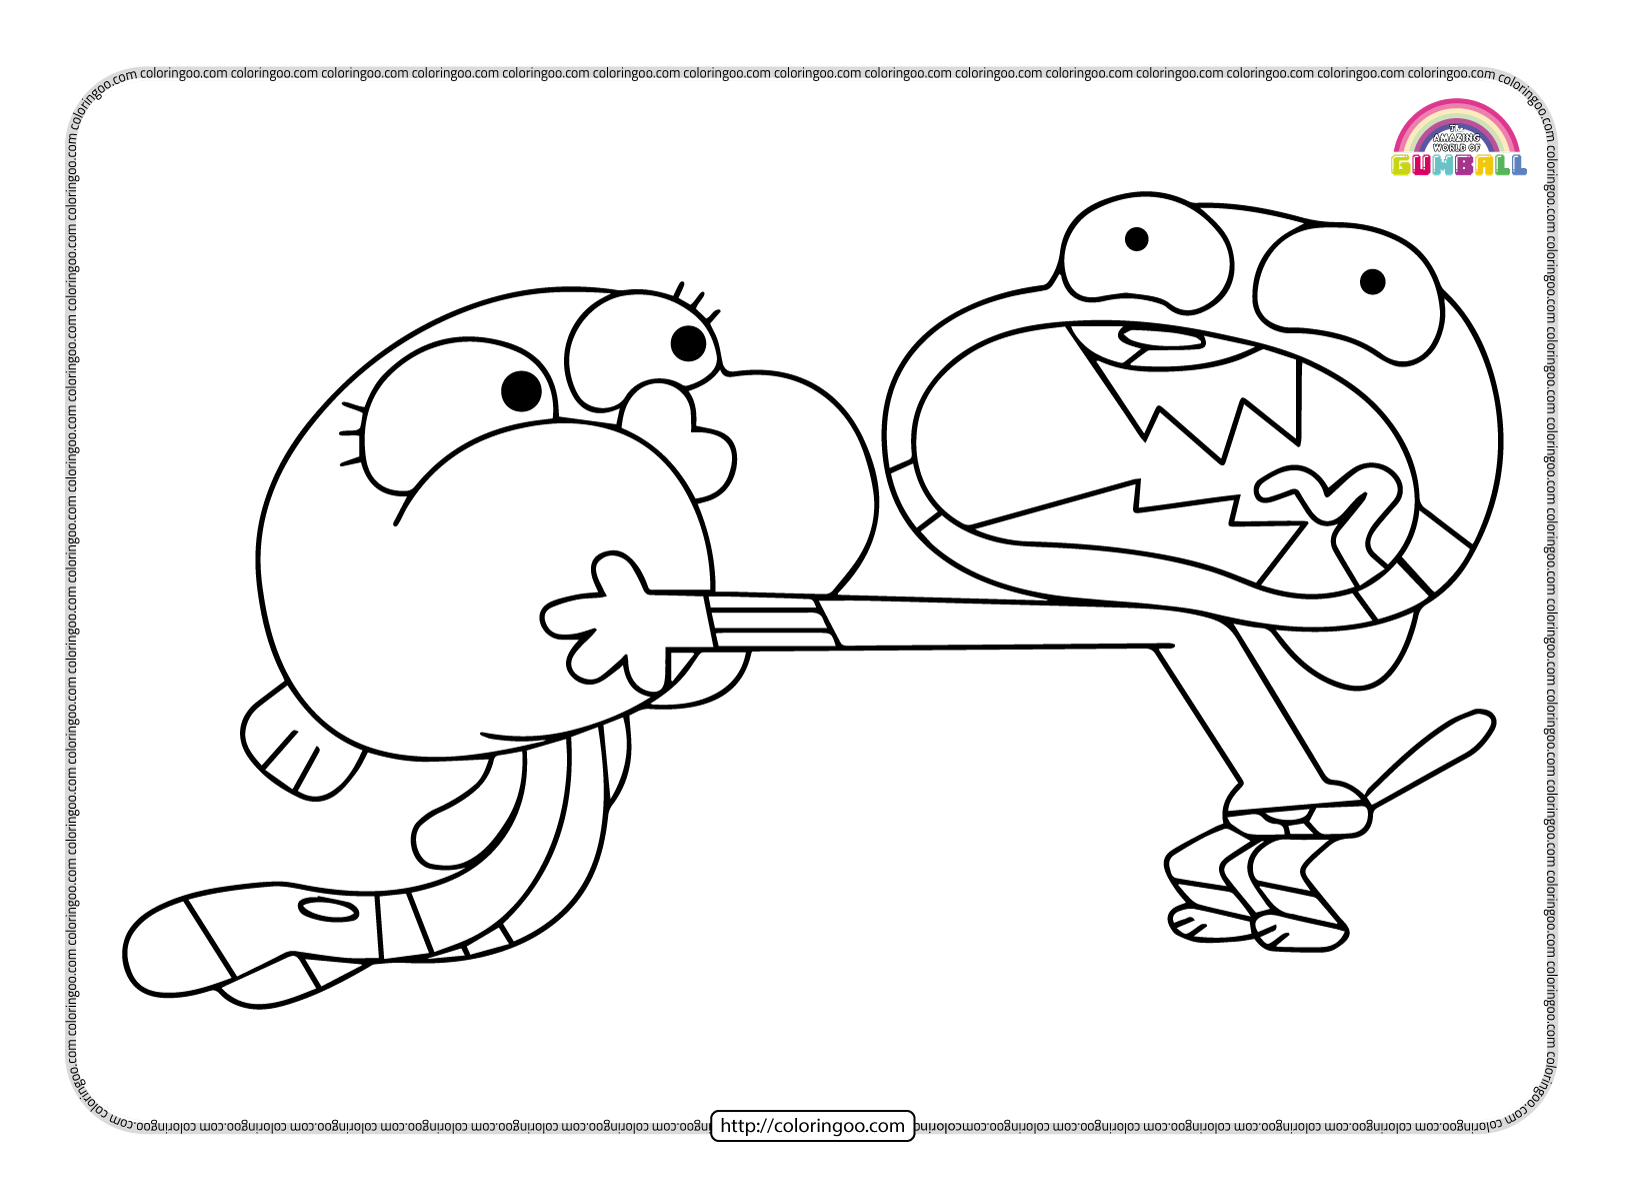 gumball is a panic boy coloring page